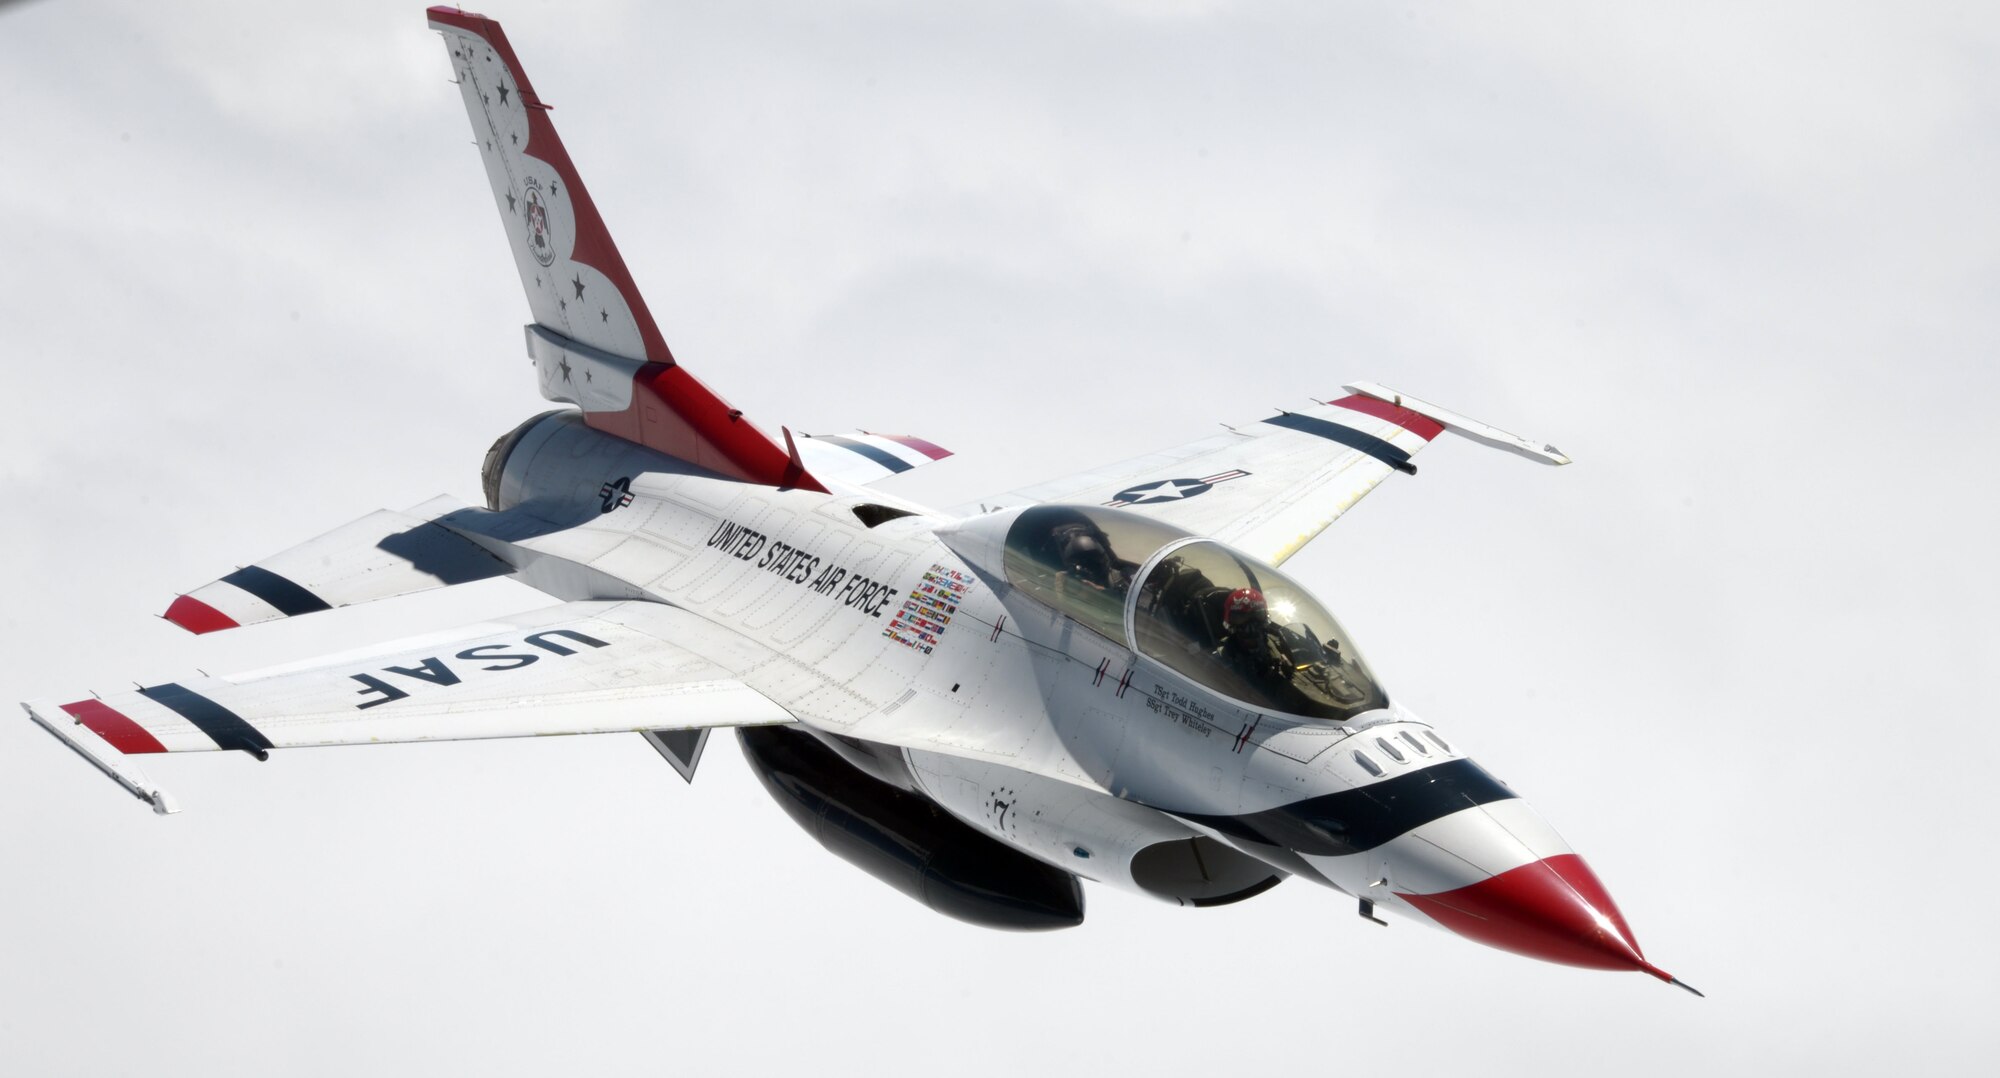 U.S. Air Force Thunderbird No. 8 flies around the formation with their photojournalist taking pictures of the squadron’s maneuvers July 10, 2017, over the Isle of Skye, Scotland. The Thunderbirds have dedicated aerial photographers to capture performances and formations from the air. (U.S. Air Force photo by Airman 1st Class Benjamin Cooper)